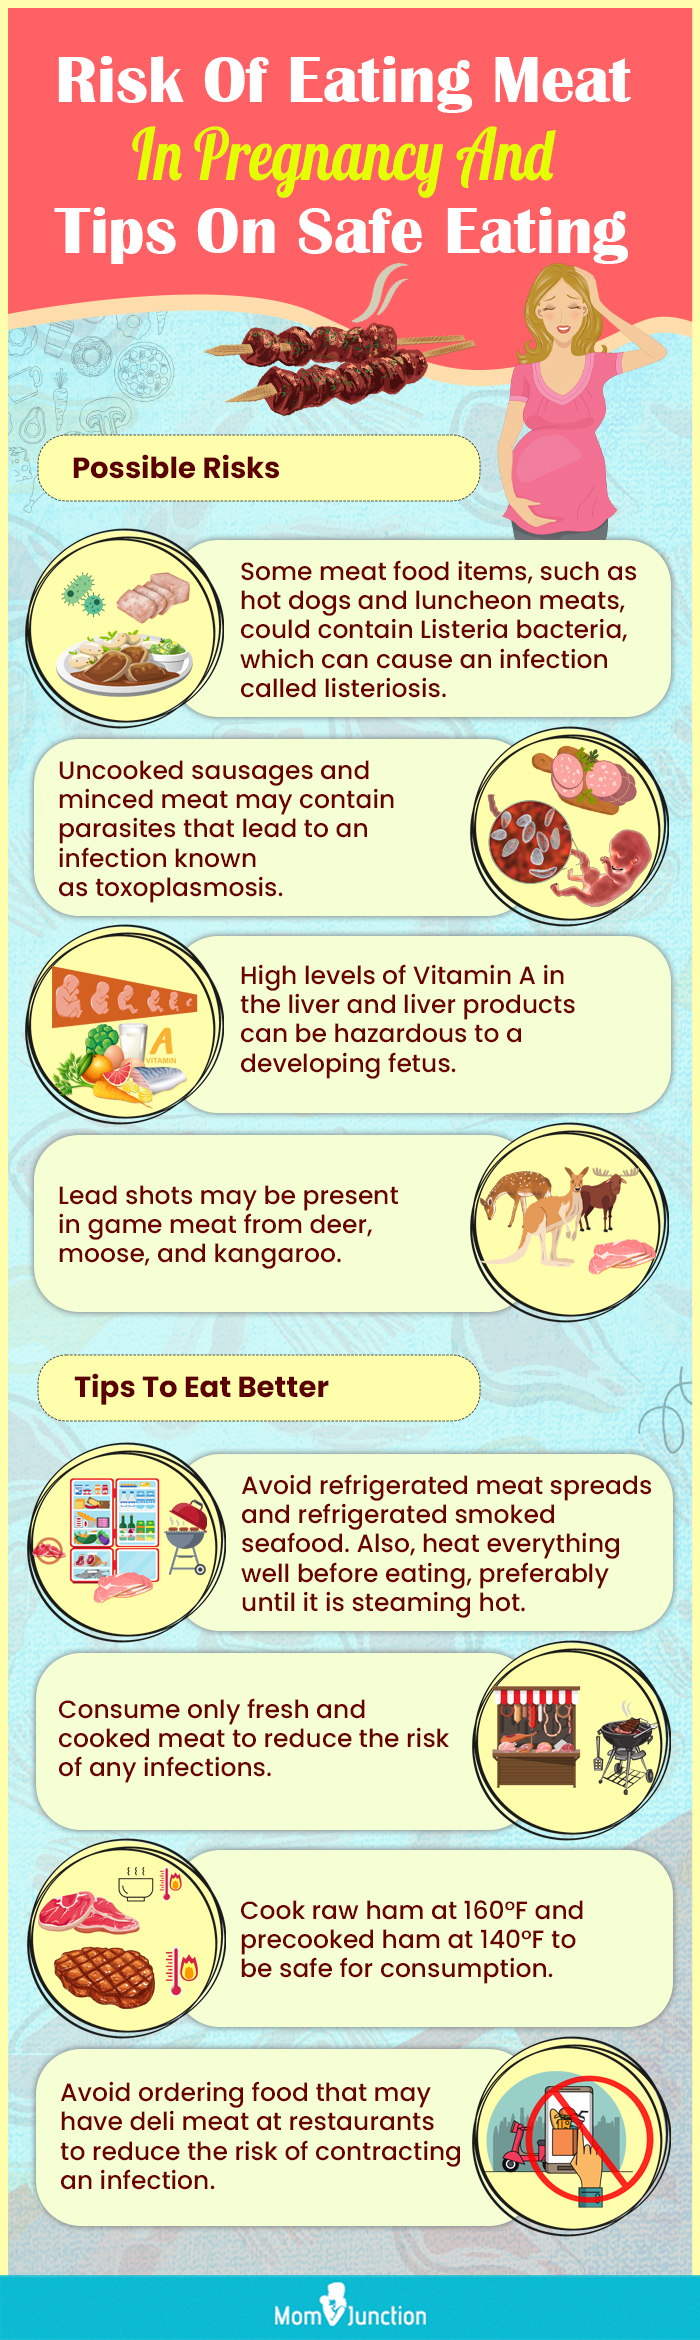 risk of eating meat in pregnancy and tips on safe eating (infographic)